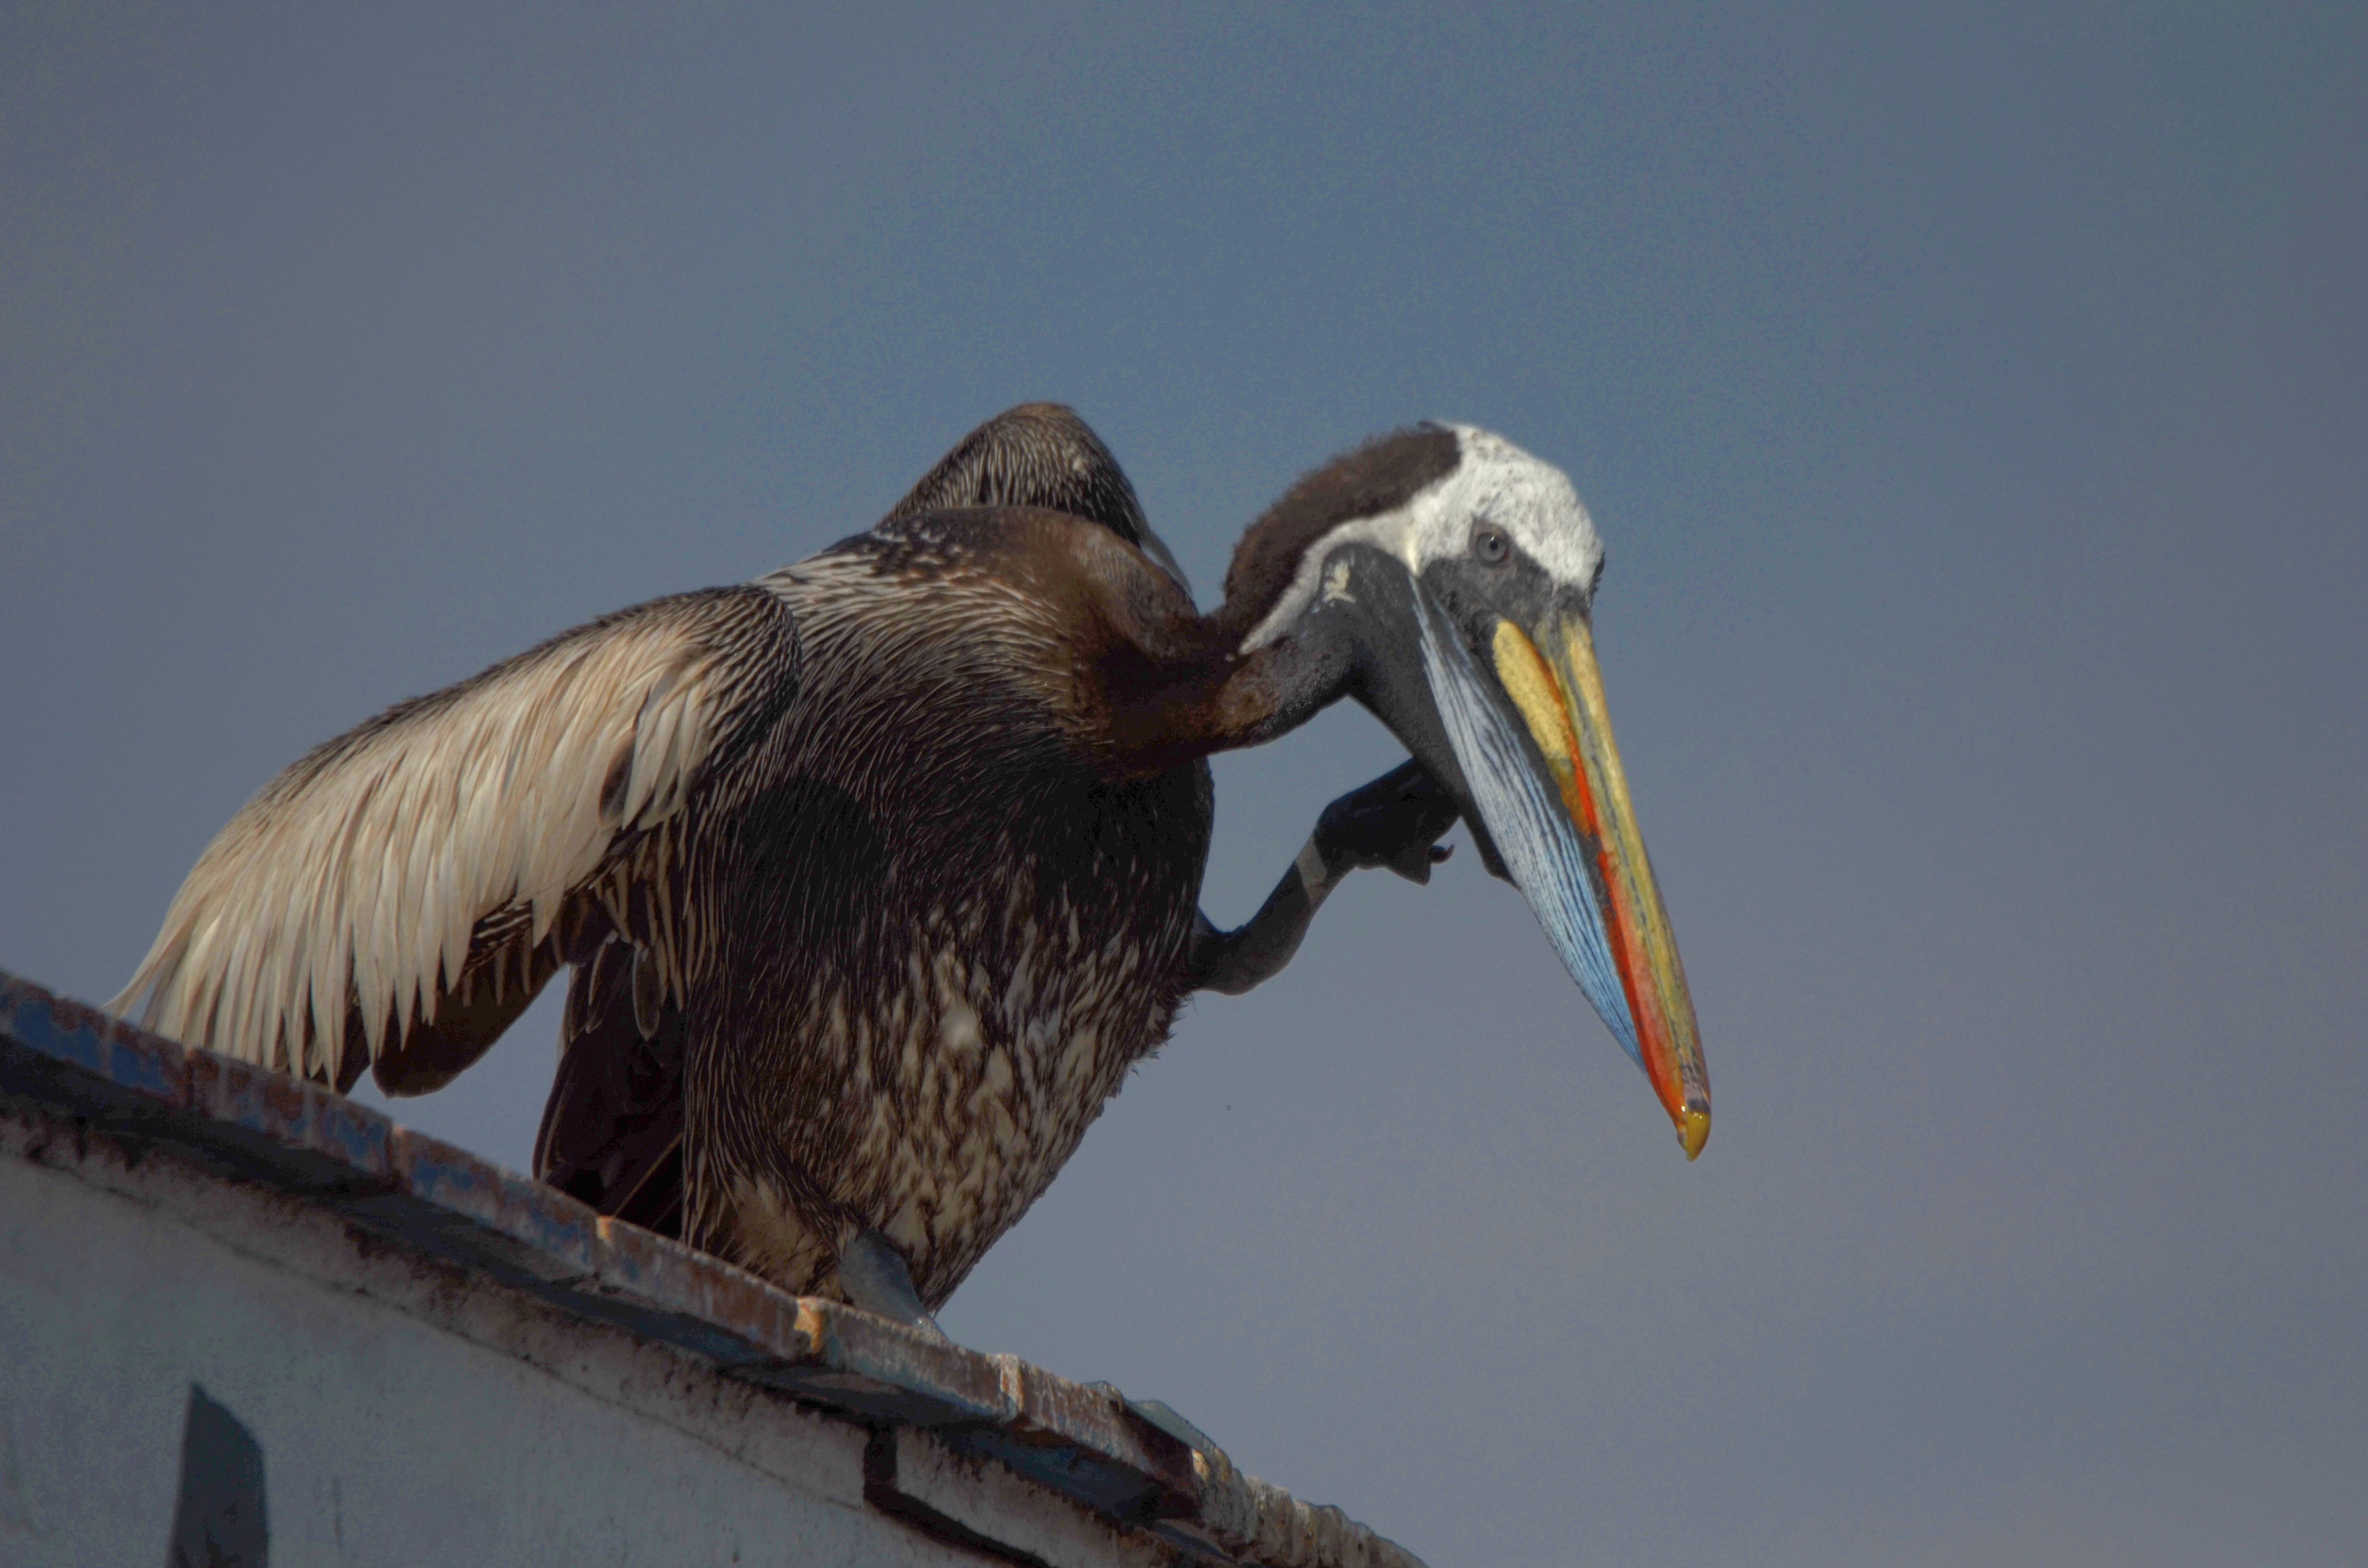 Click picture to see more Peruvian Pelicans.